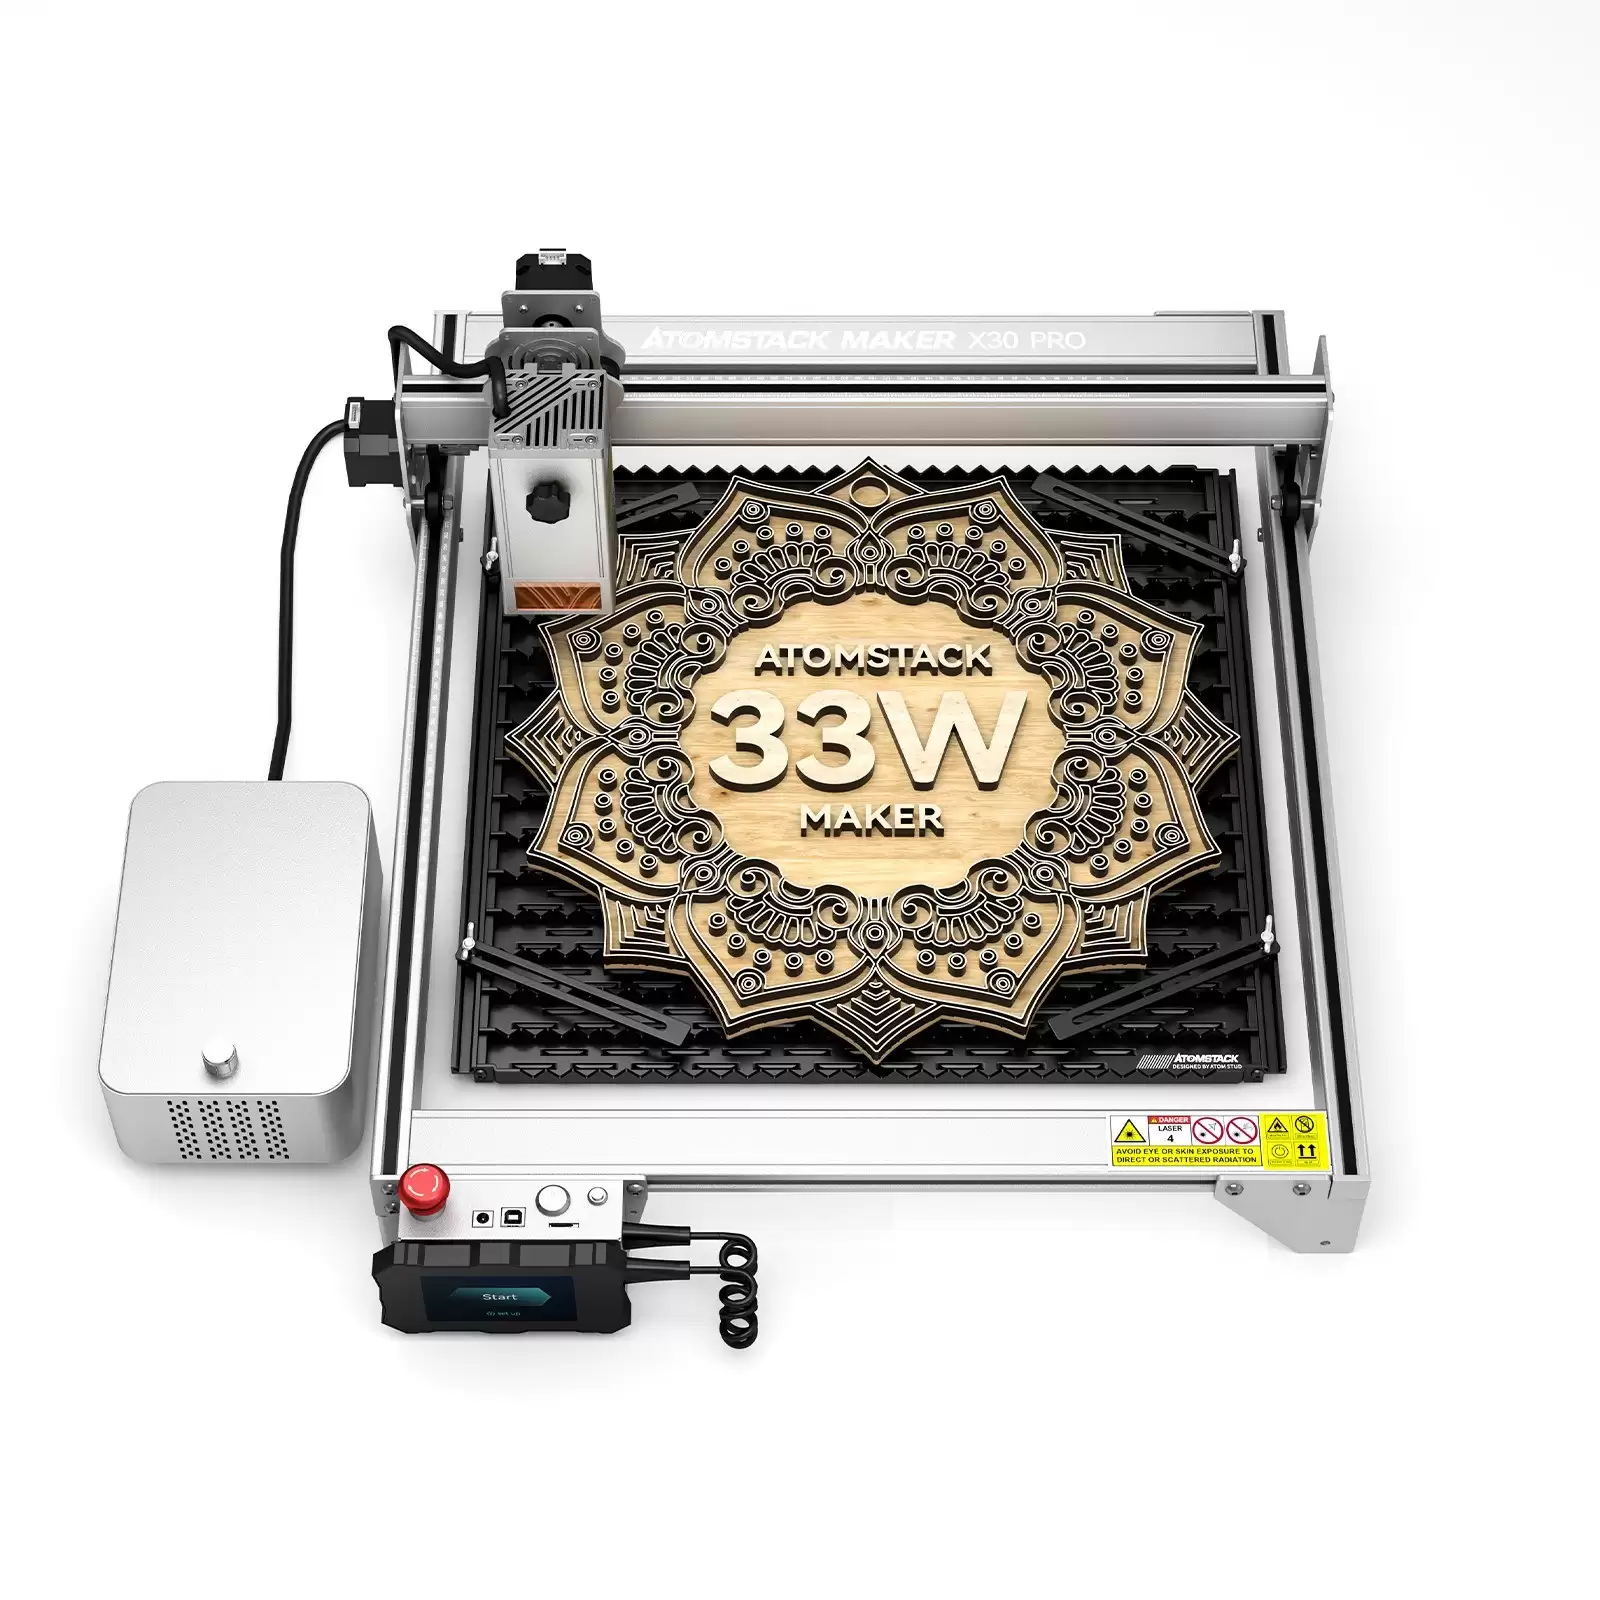 Order In Just $1089 Atomstack Maker X30 Pro 33w Laser Engraver With F30 Pro Air Assist System With This Discount Voucher